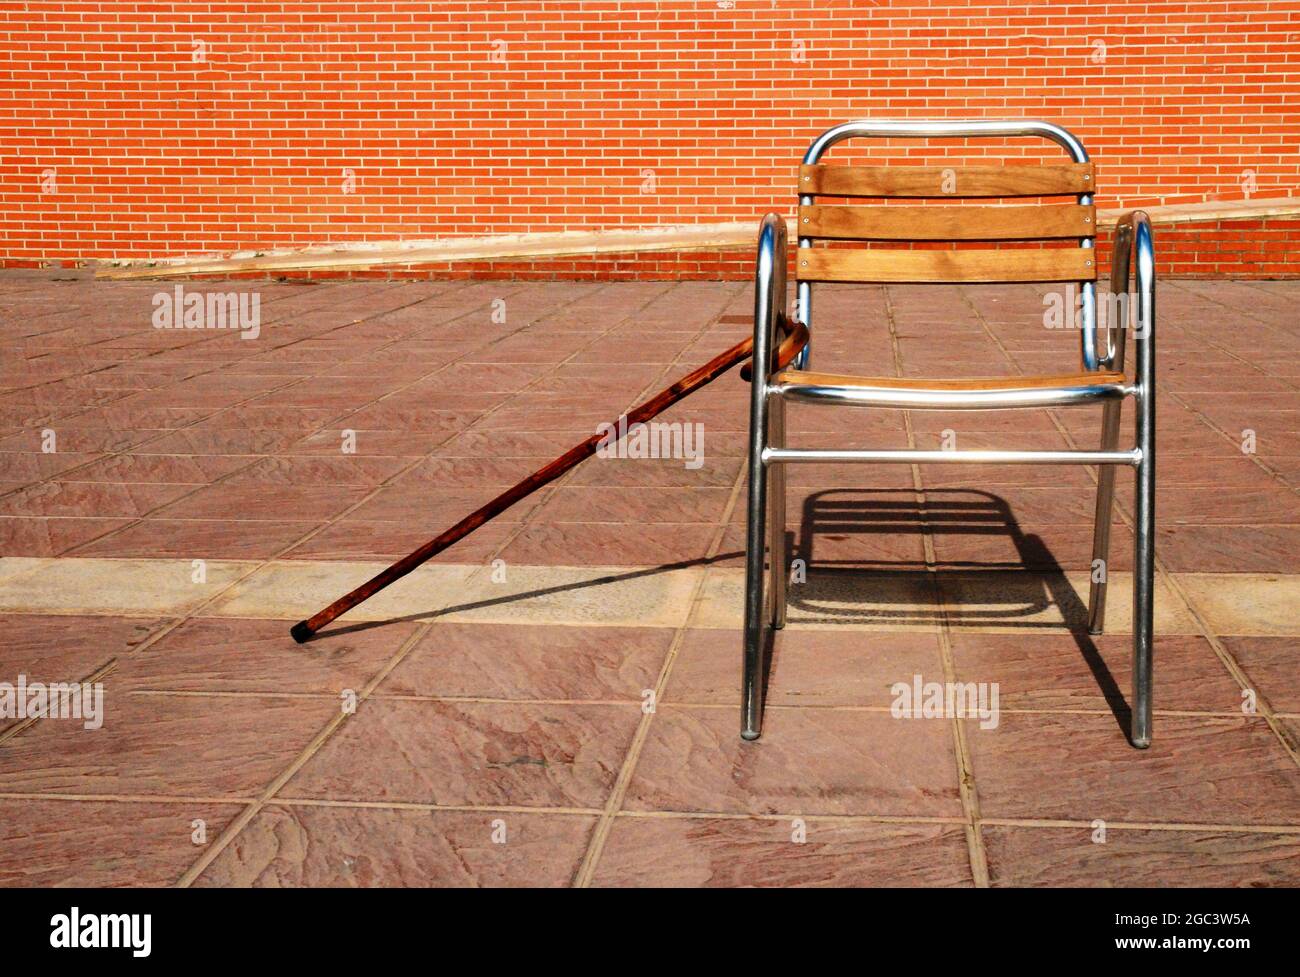 Chair on the street next to walking stick of elderly person, getting old Stock Photo